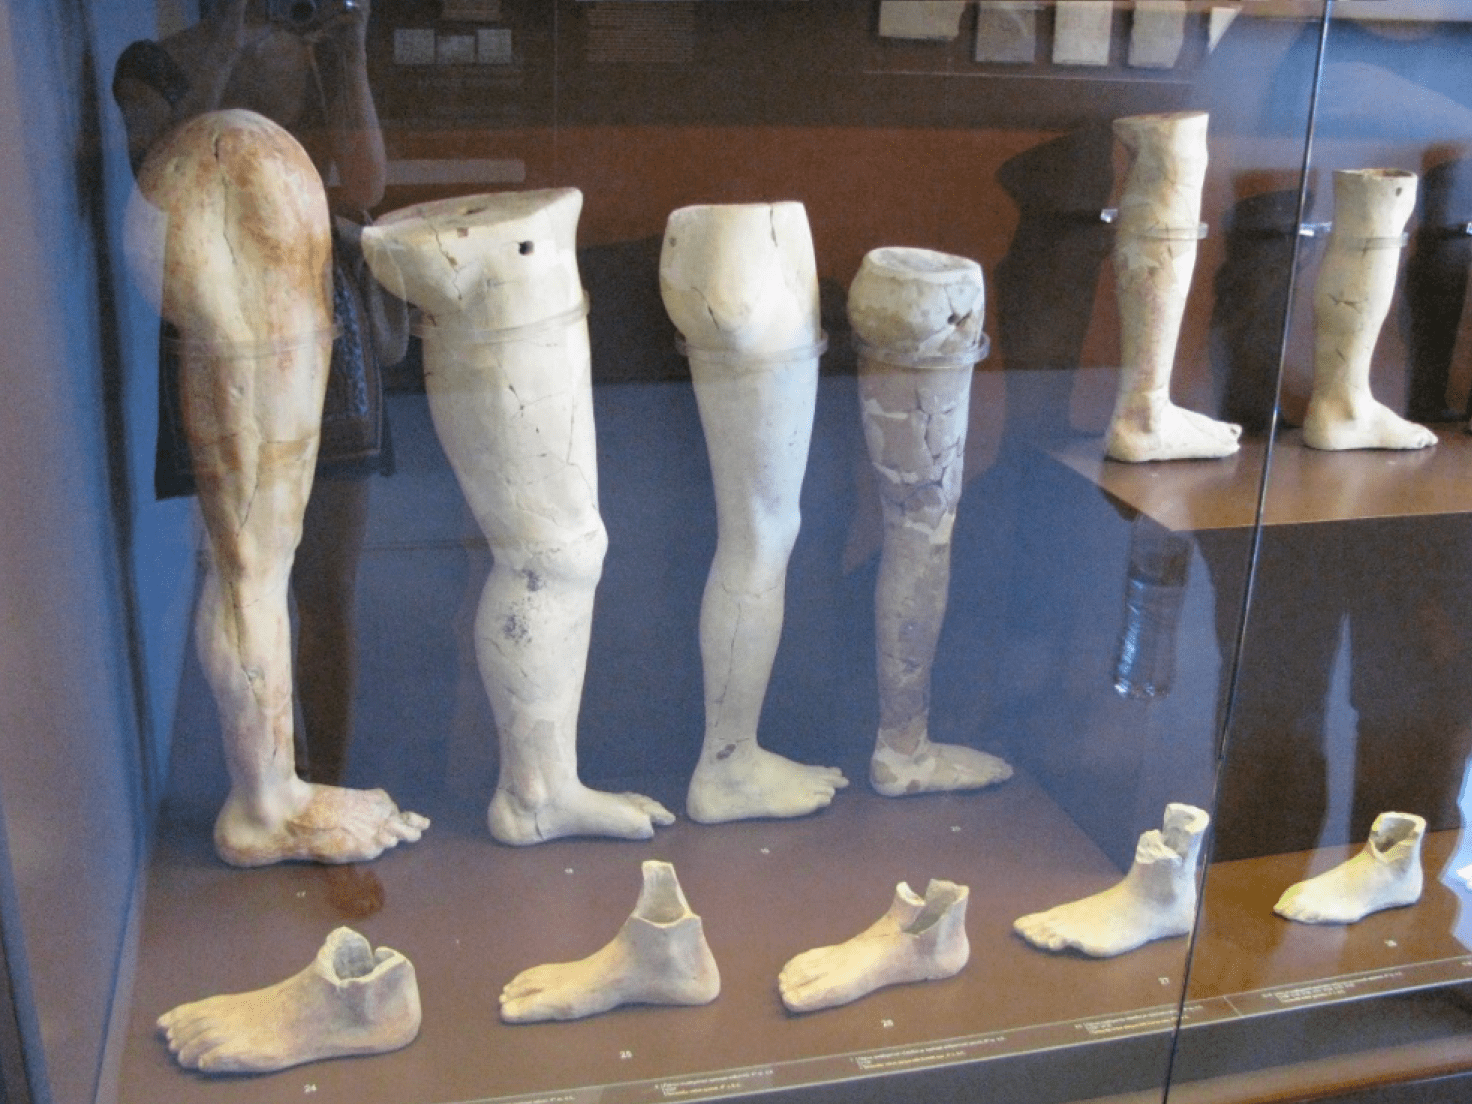 Votive offerings of limbs recovered from the sanctuary of Asclepius at Corinth. (Image: Hannah Shields)